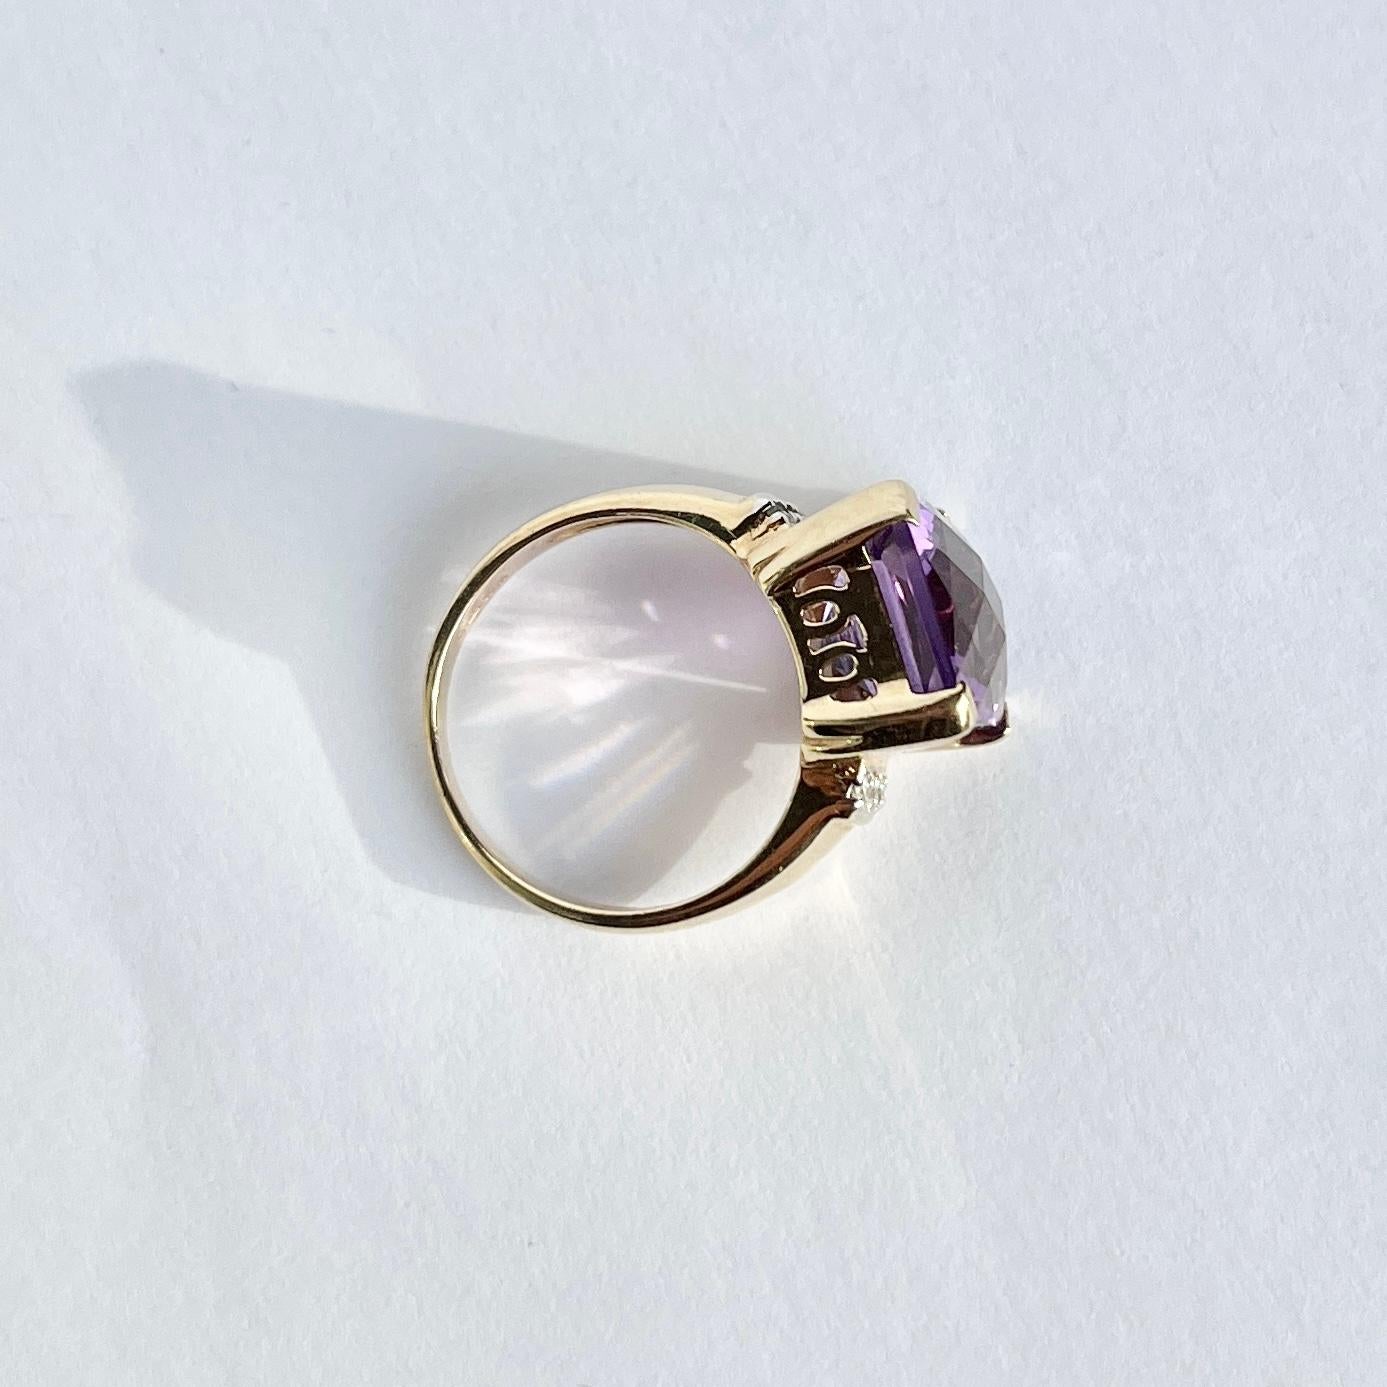 Vintage Amethyst and Diamond 9 Carat Gold Ring In Good Condition For Sale In Chipping Campden, GB